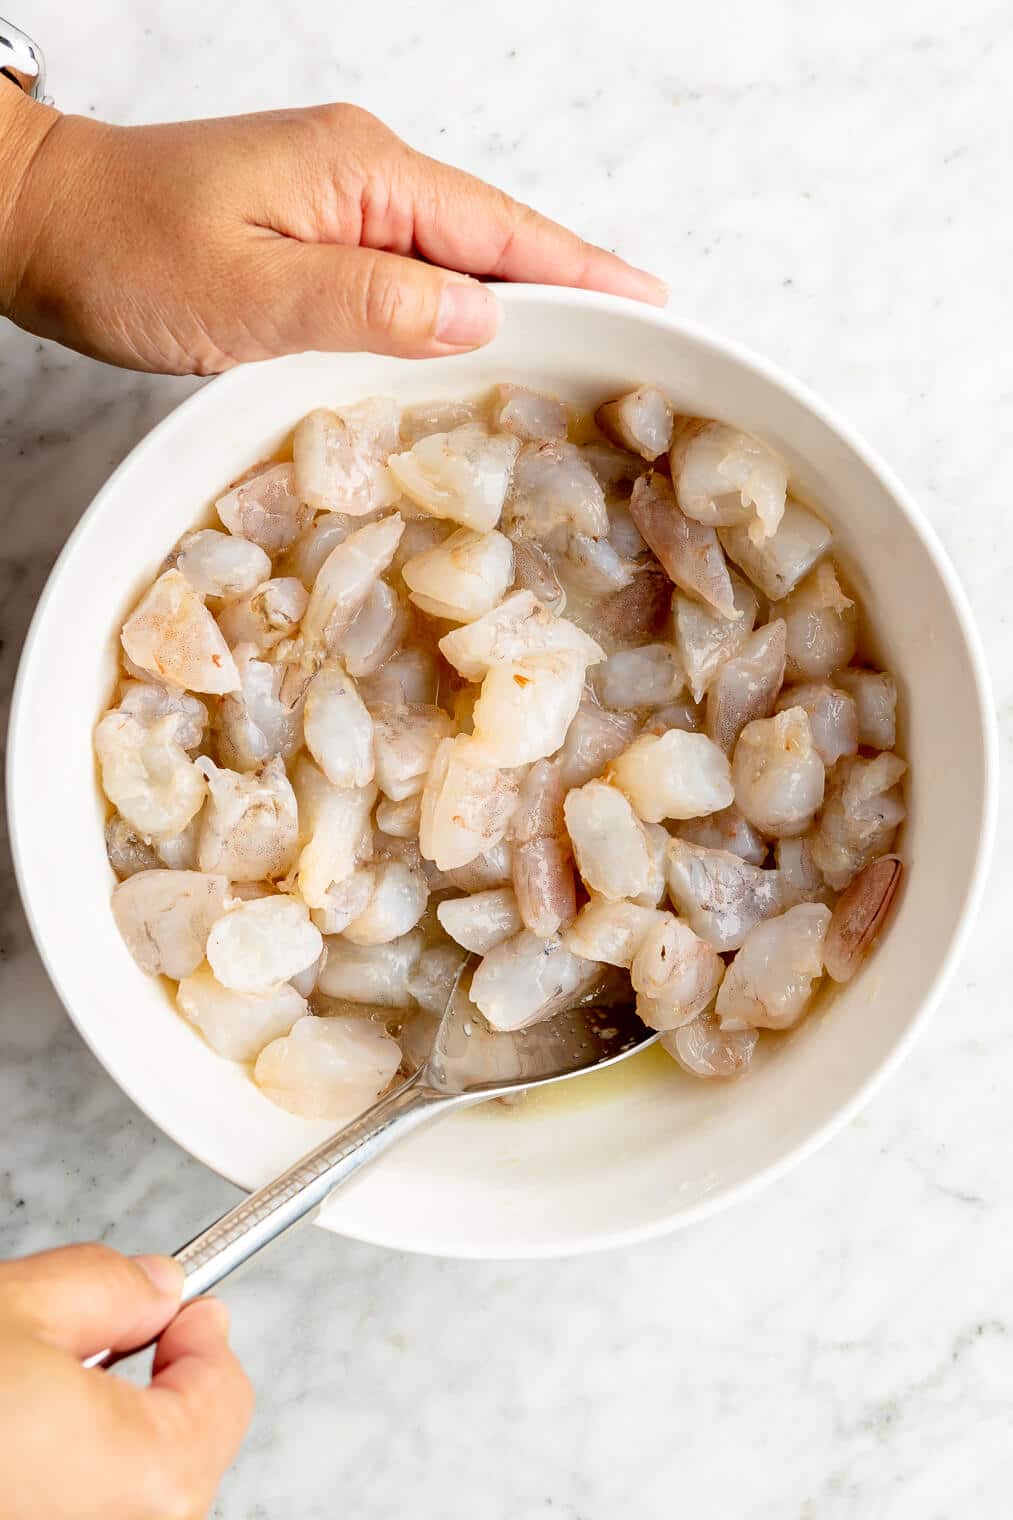 Chopped shrimp in a lime marinade for shrimp ceviche.